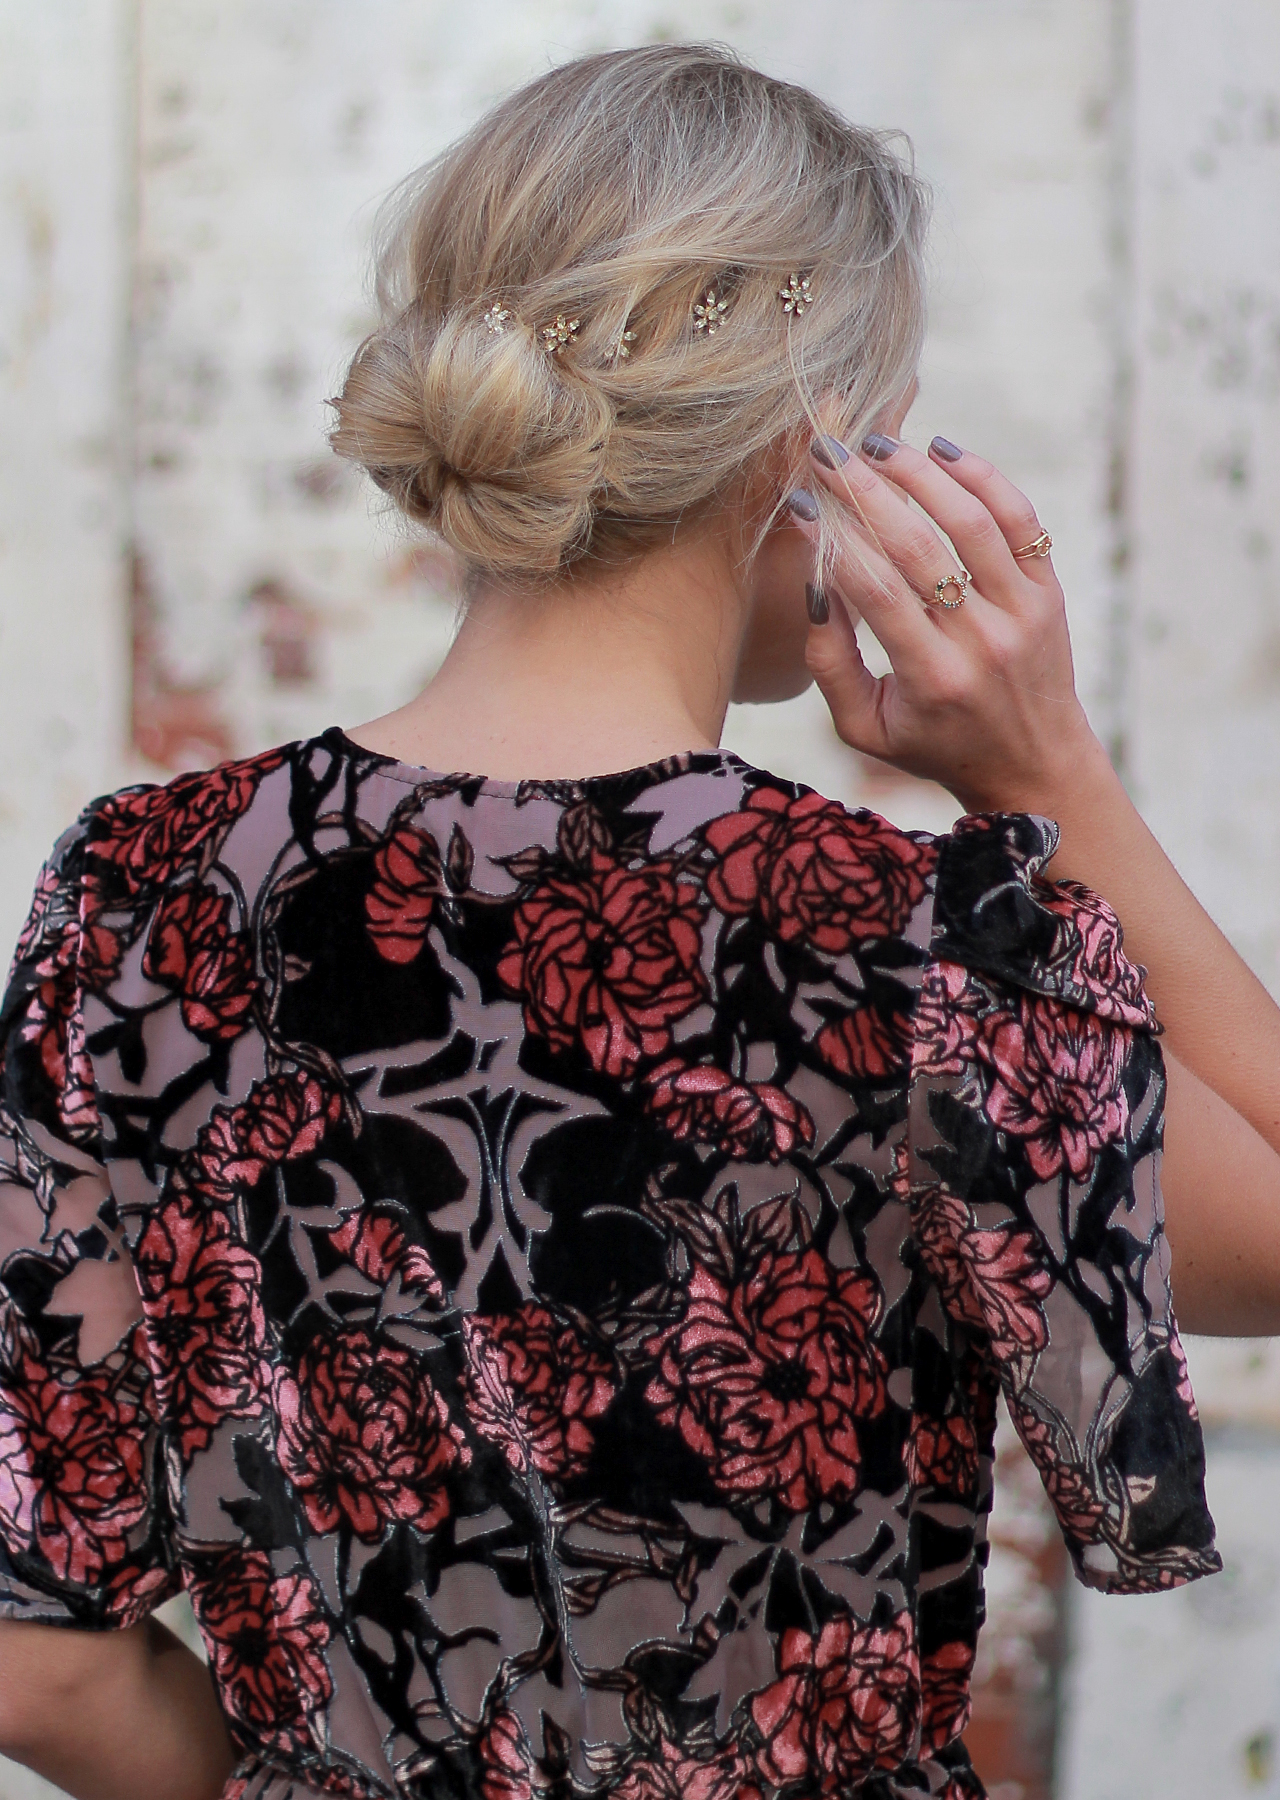 The Steele Maiden: How to: Easy Holiday Hair Style with Hair Accessories